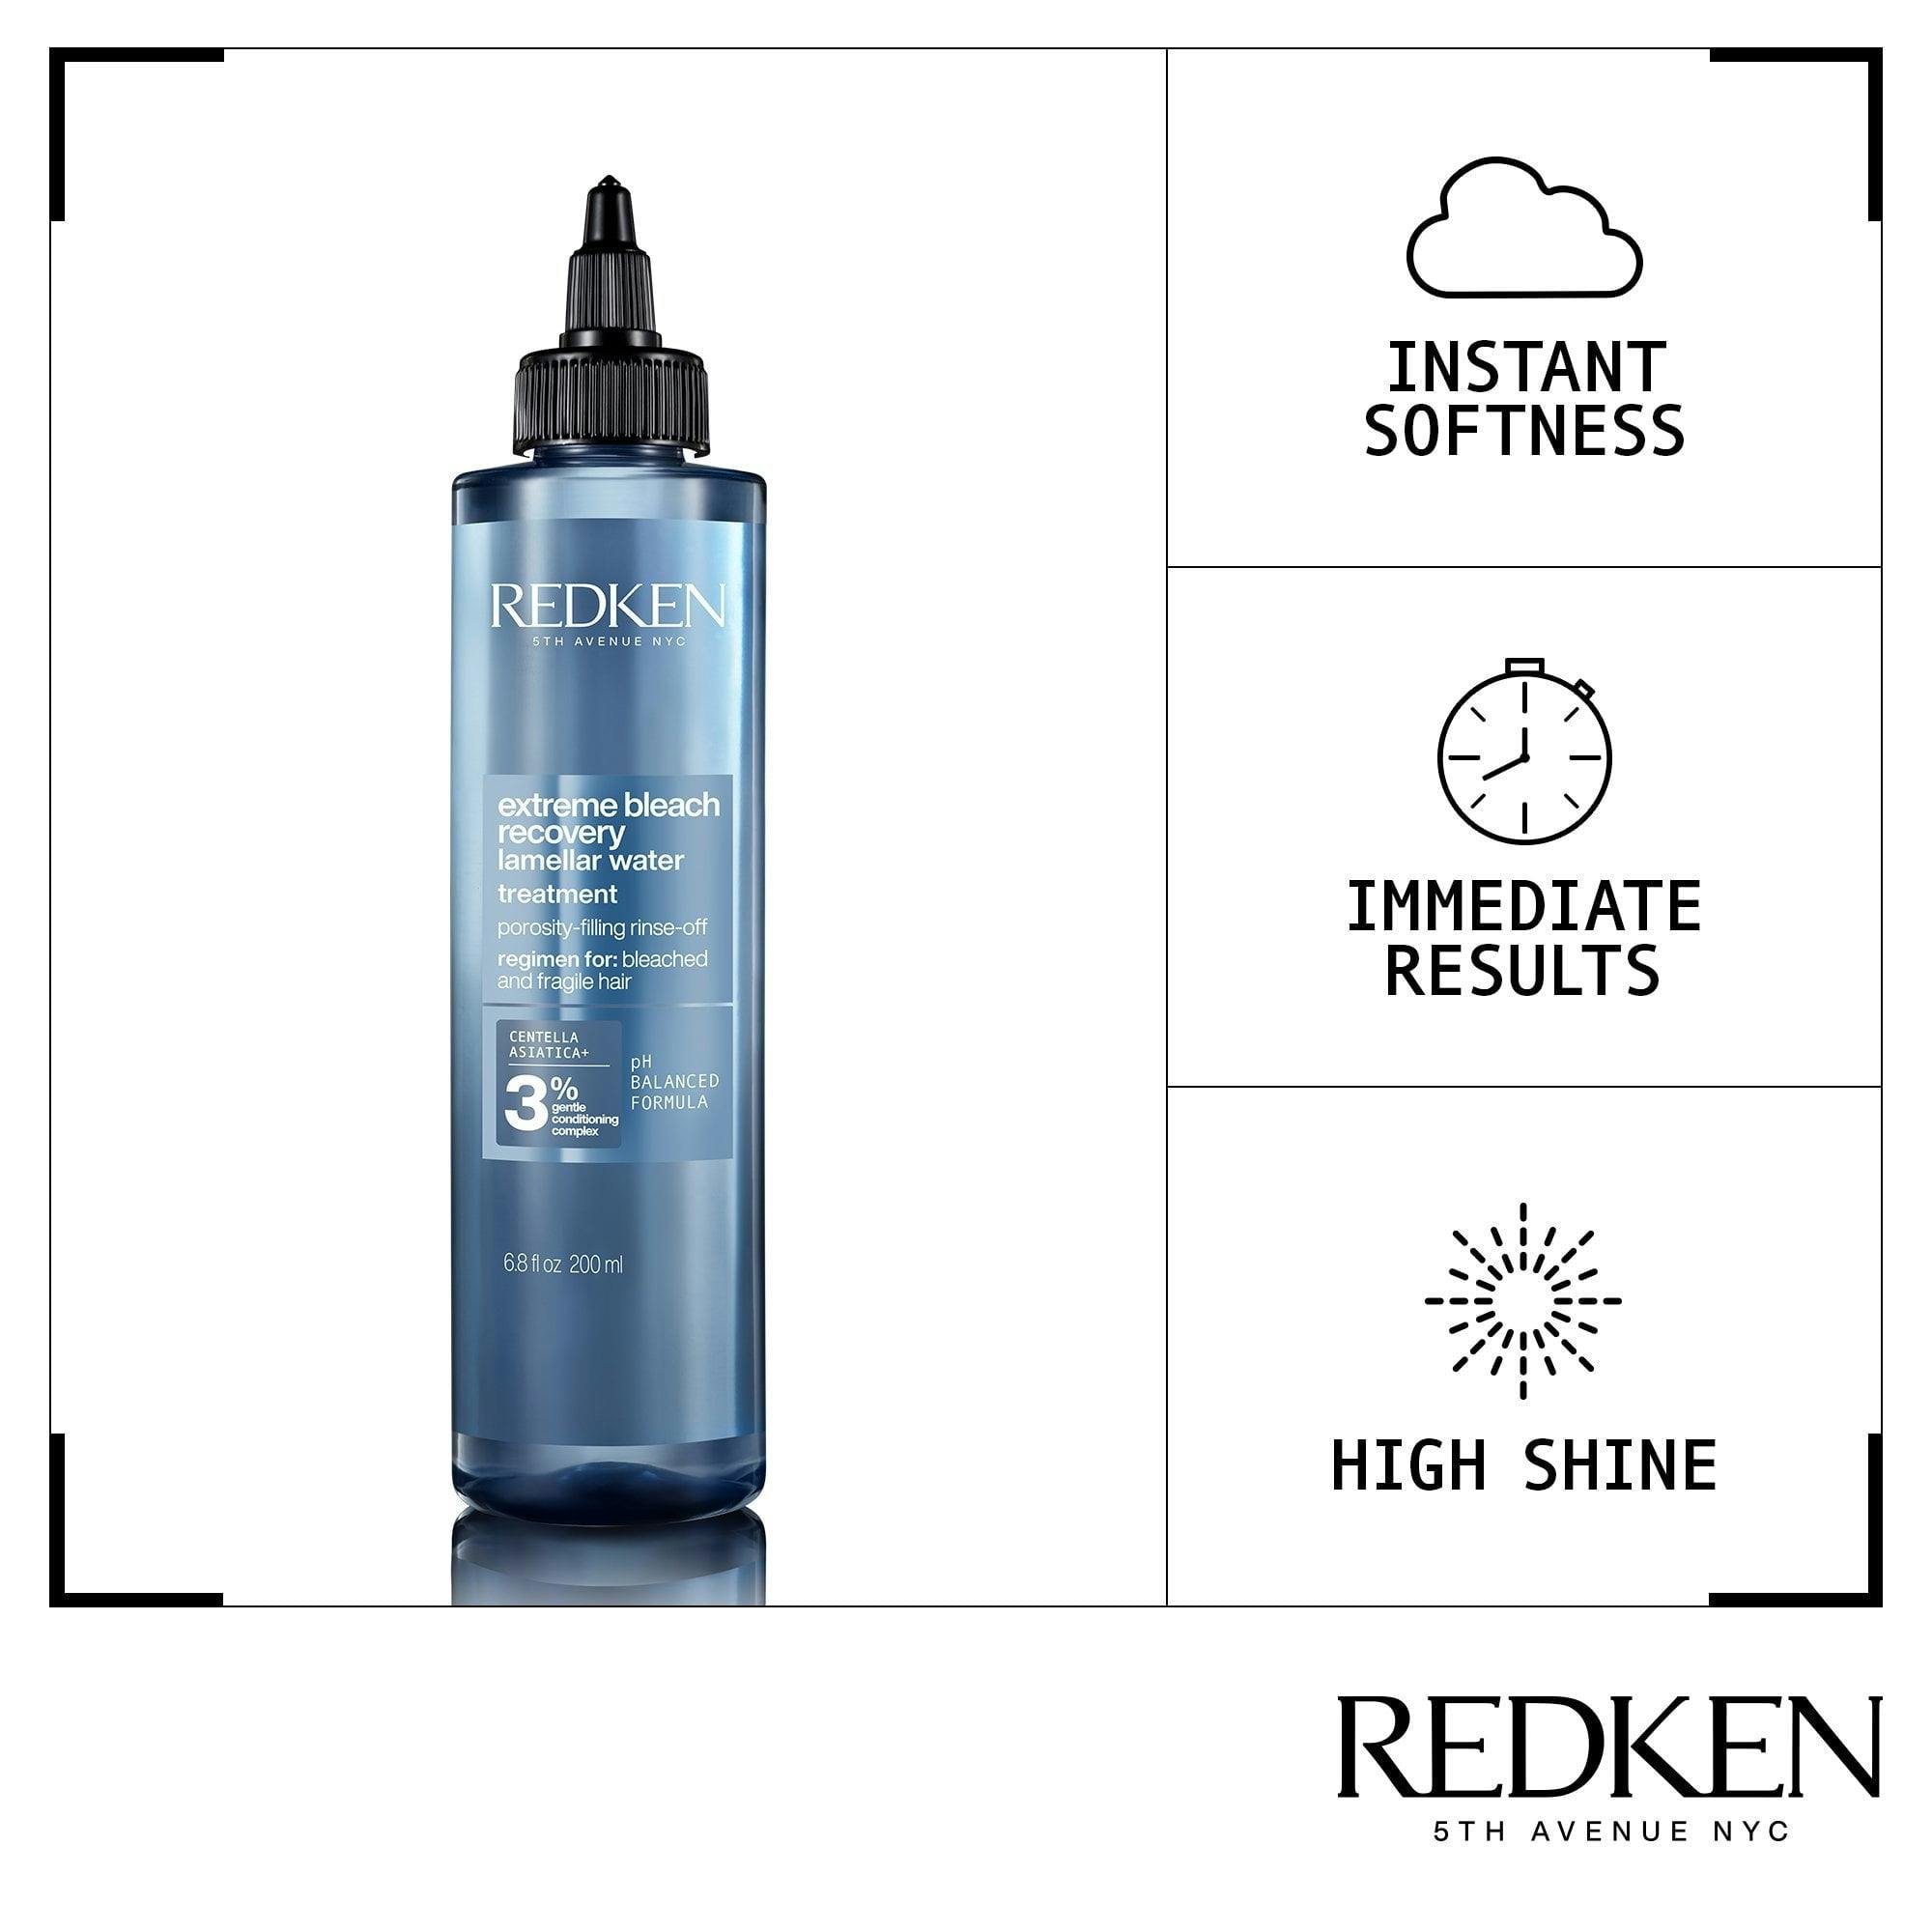 Redken Extreme Bleach Recovery Lamellar Water Rinse Out Treatment 200ml